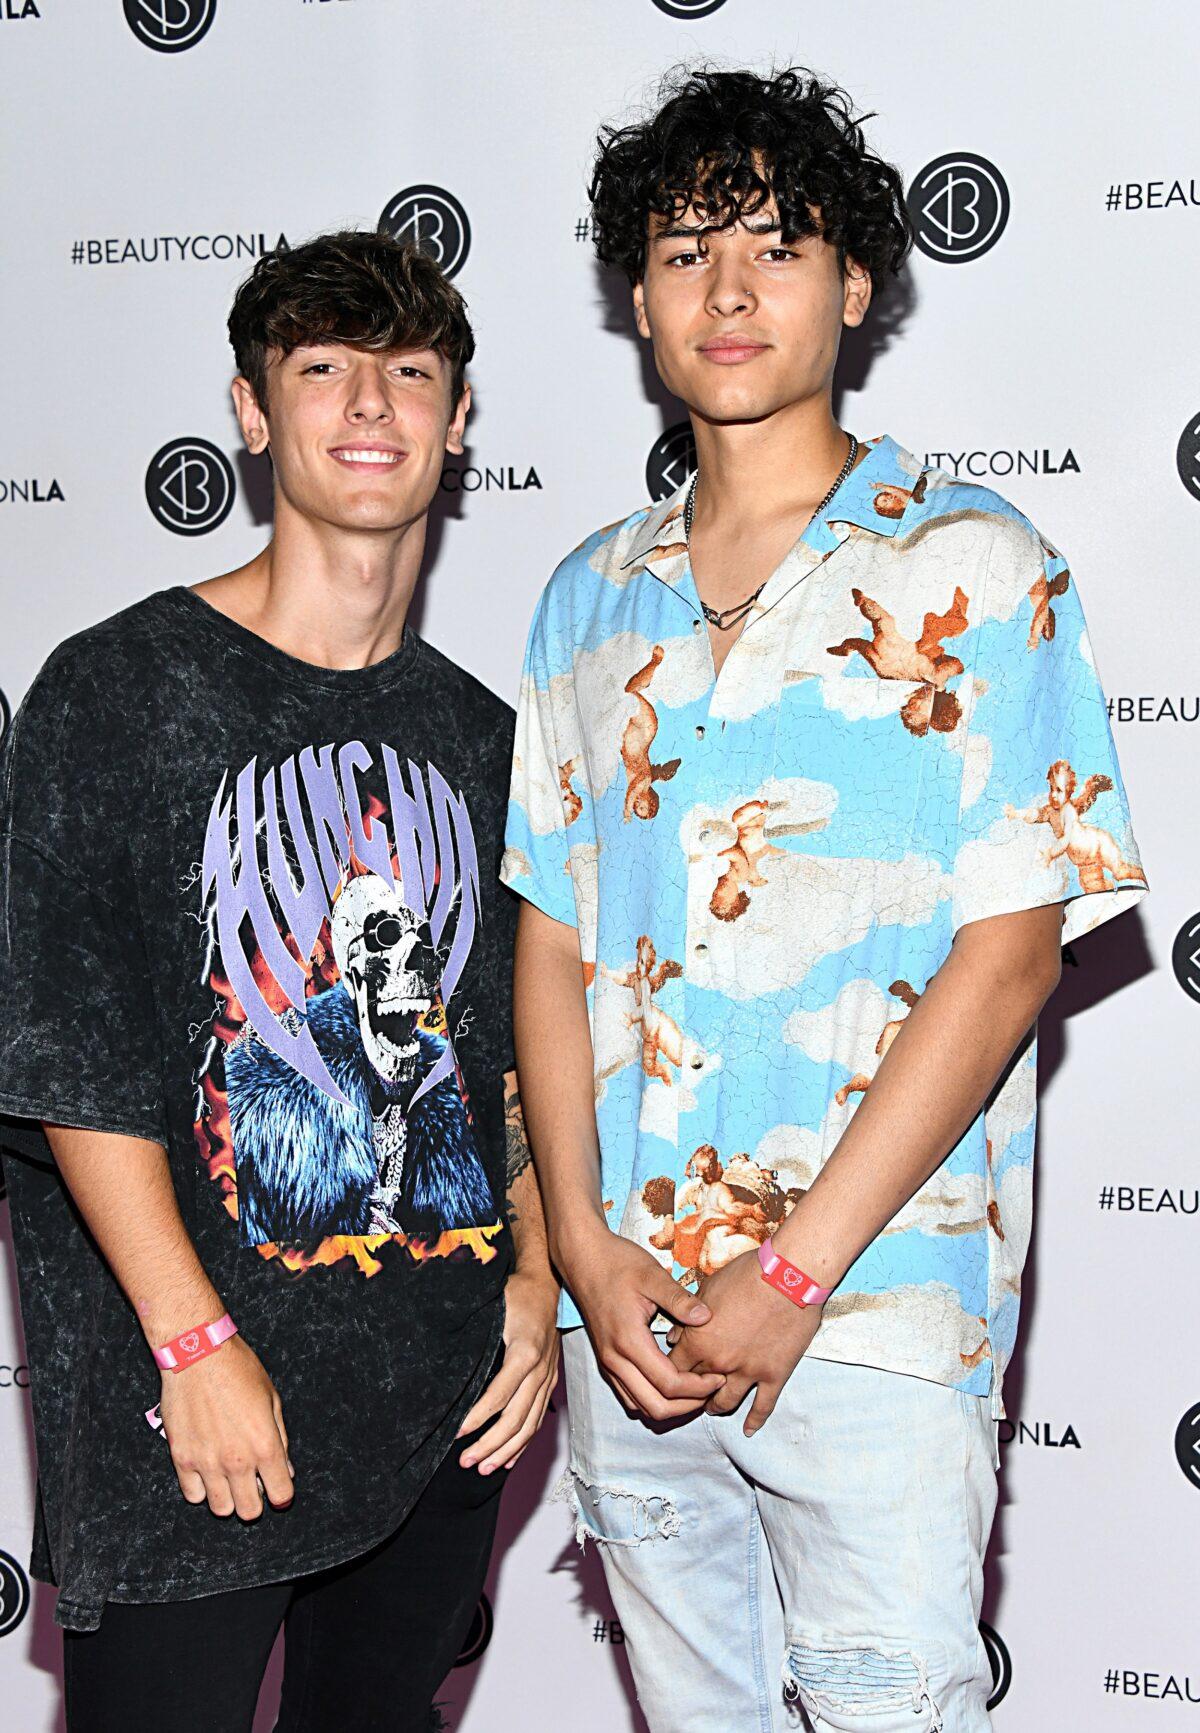 Bryce Hall, left, and Giovanny Valencia attend an event in Los Angeles, Calif., on Aug. 11, 2019. (Araya Diaz/Getty Images for Beautycon)